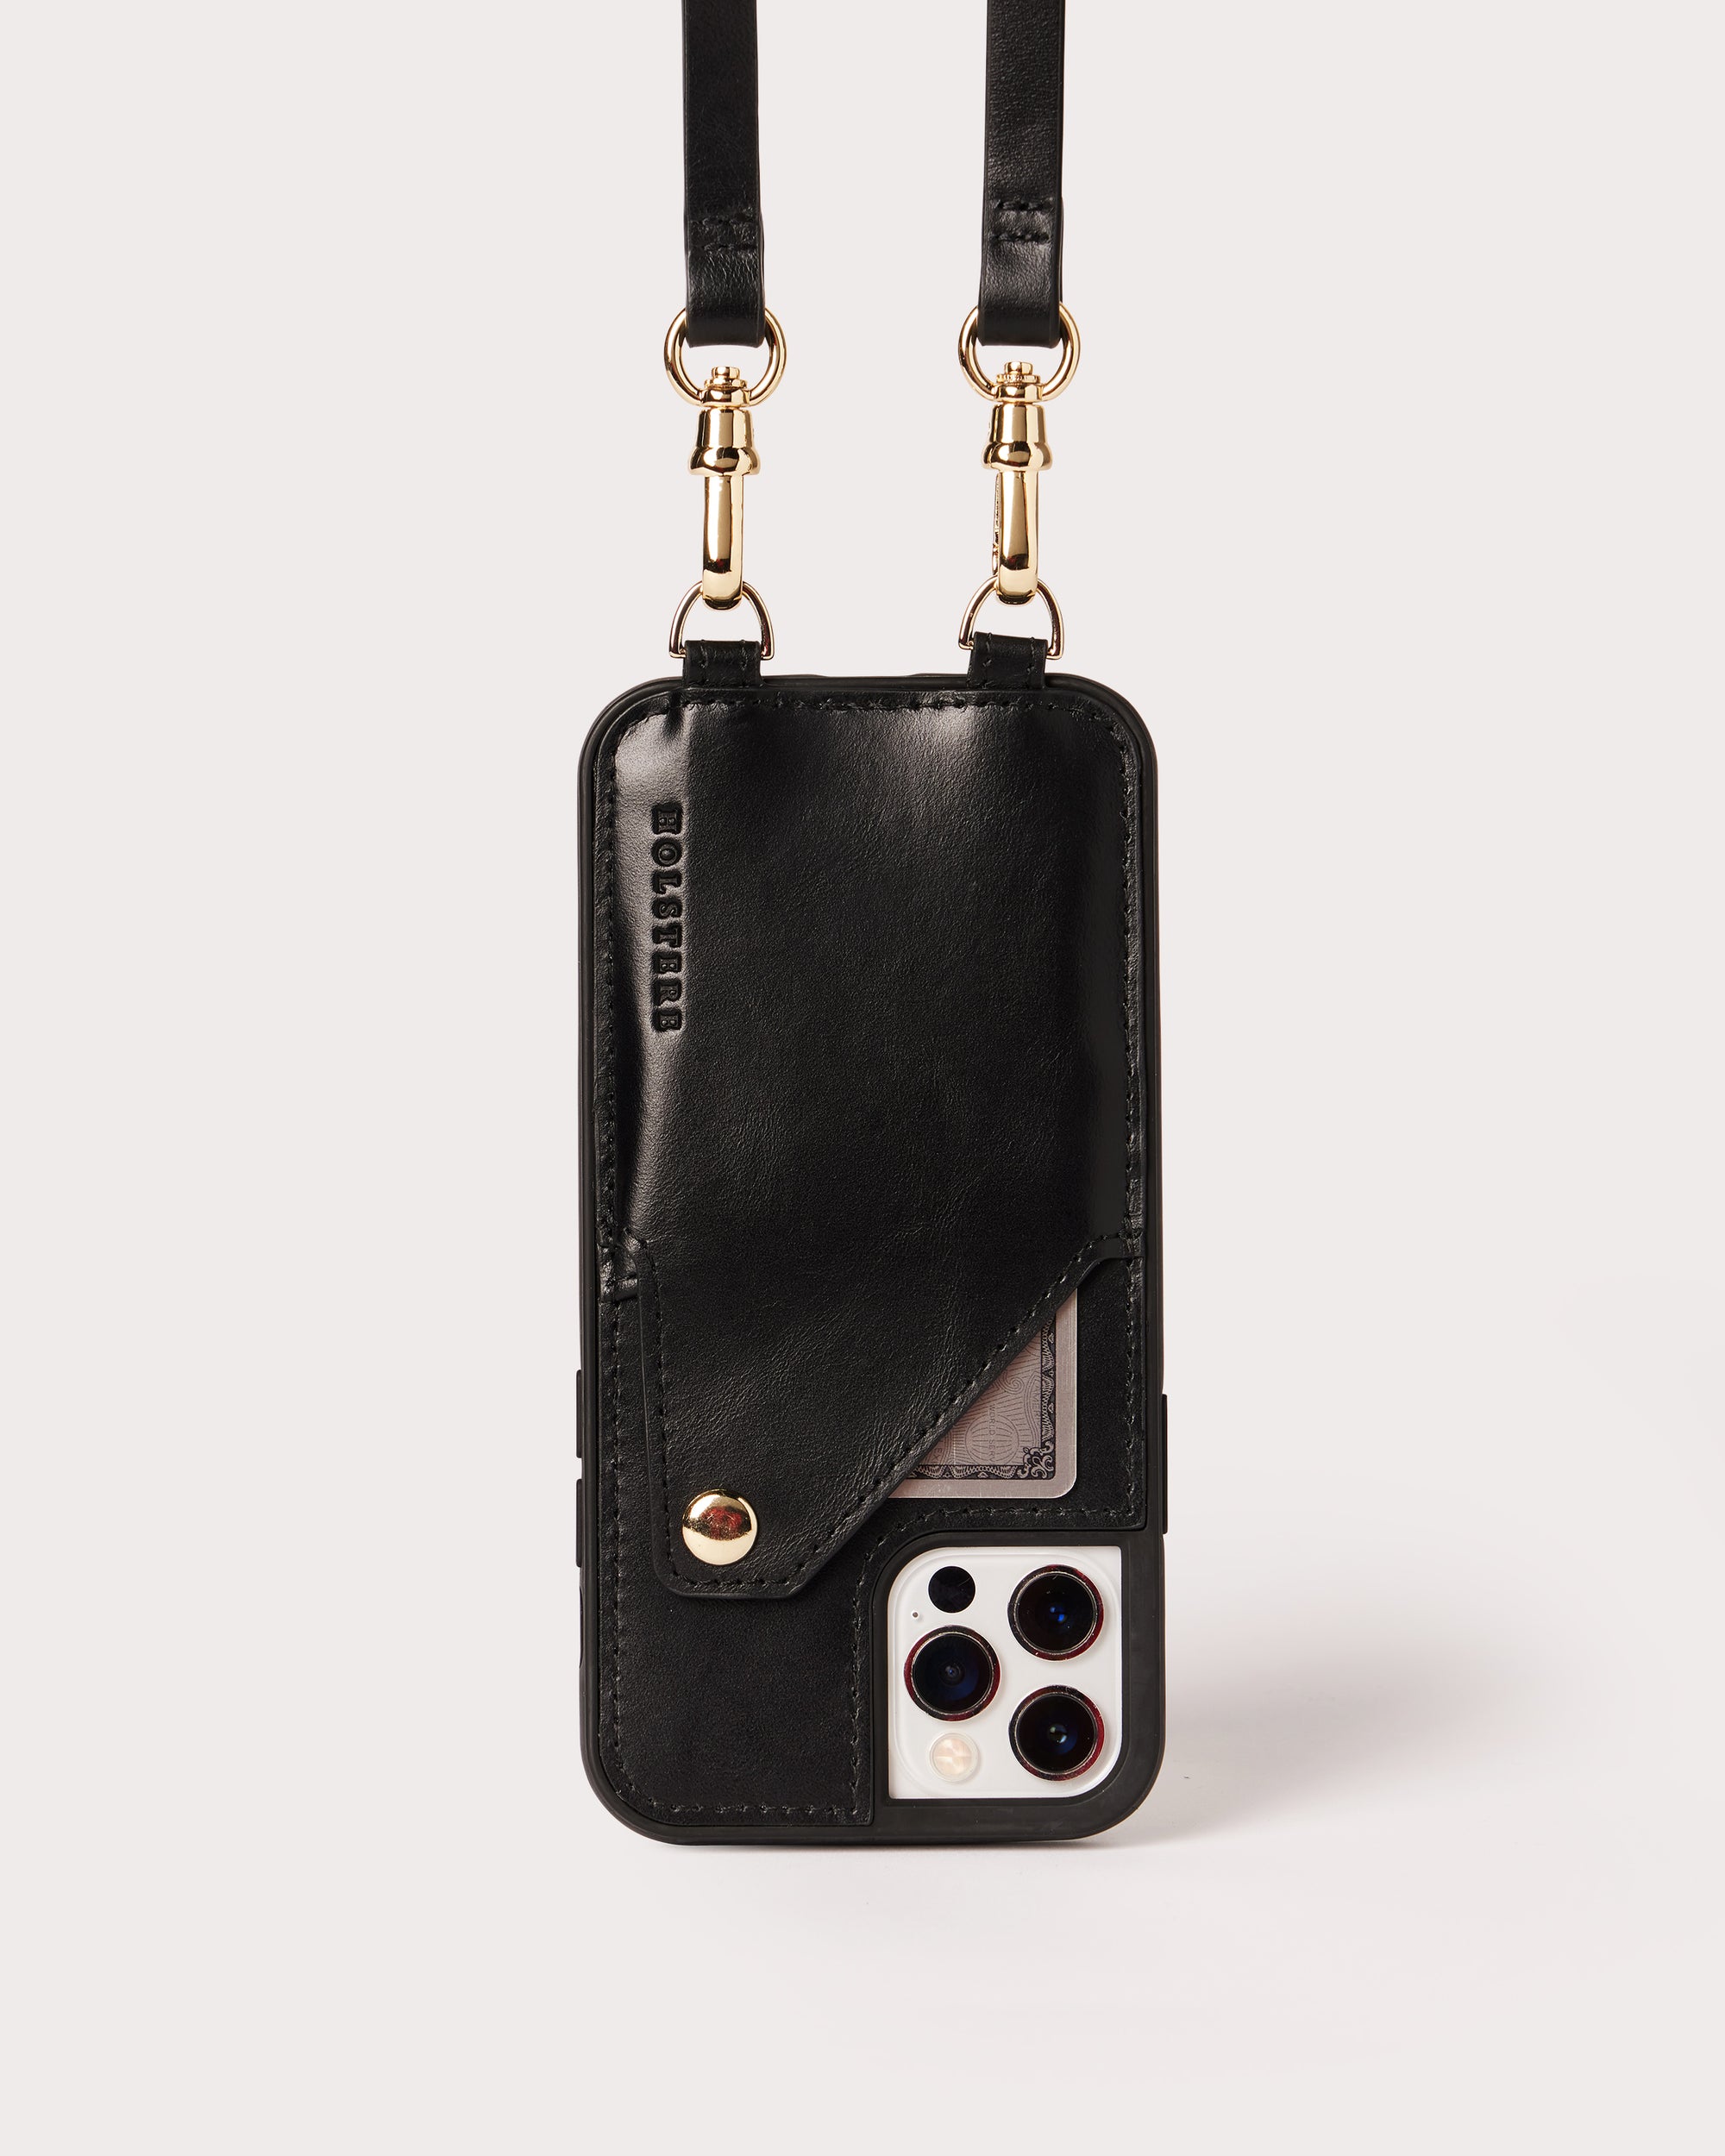 Holstere Genuine Leather iPhone Case Crossbody Phone Purse Cross Body Holster Clip for Easy Carry Hands Free - Real Black Smooth Leather Snap In Phone Case with Wallet Credit Card ID Sleeve, Snap Shut Button, and Adjustable Length Shoulder Strap with Gold Hardware. iPhone Leash for iPhone 6, 6s, 7, 8, 6 Plus, 7 Plus, 8 Plus, SE, X, 10, XS, XR, XS Max, 11, 11 Pro, 11 Pro Max, 12, 12 Pro, 12 Pro Max, 12 Mini, 13, 13 Pro, 13 Pro Max, 13 Mini